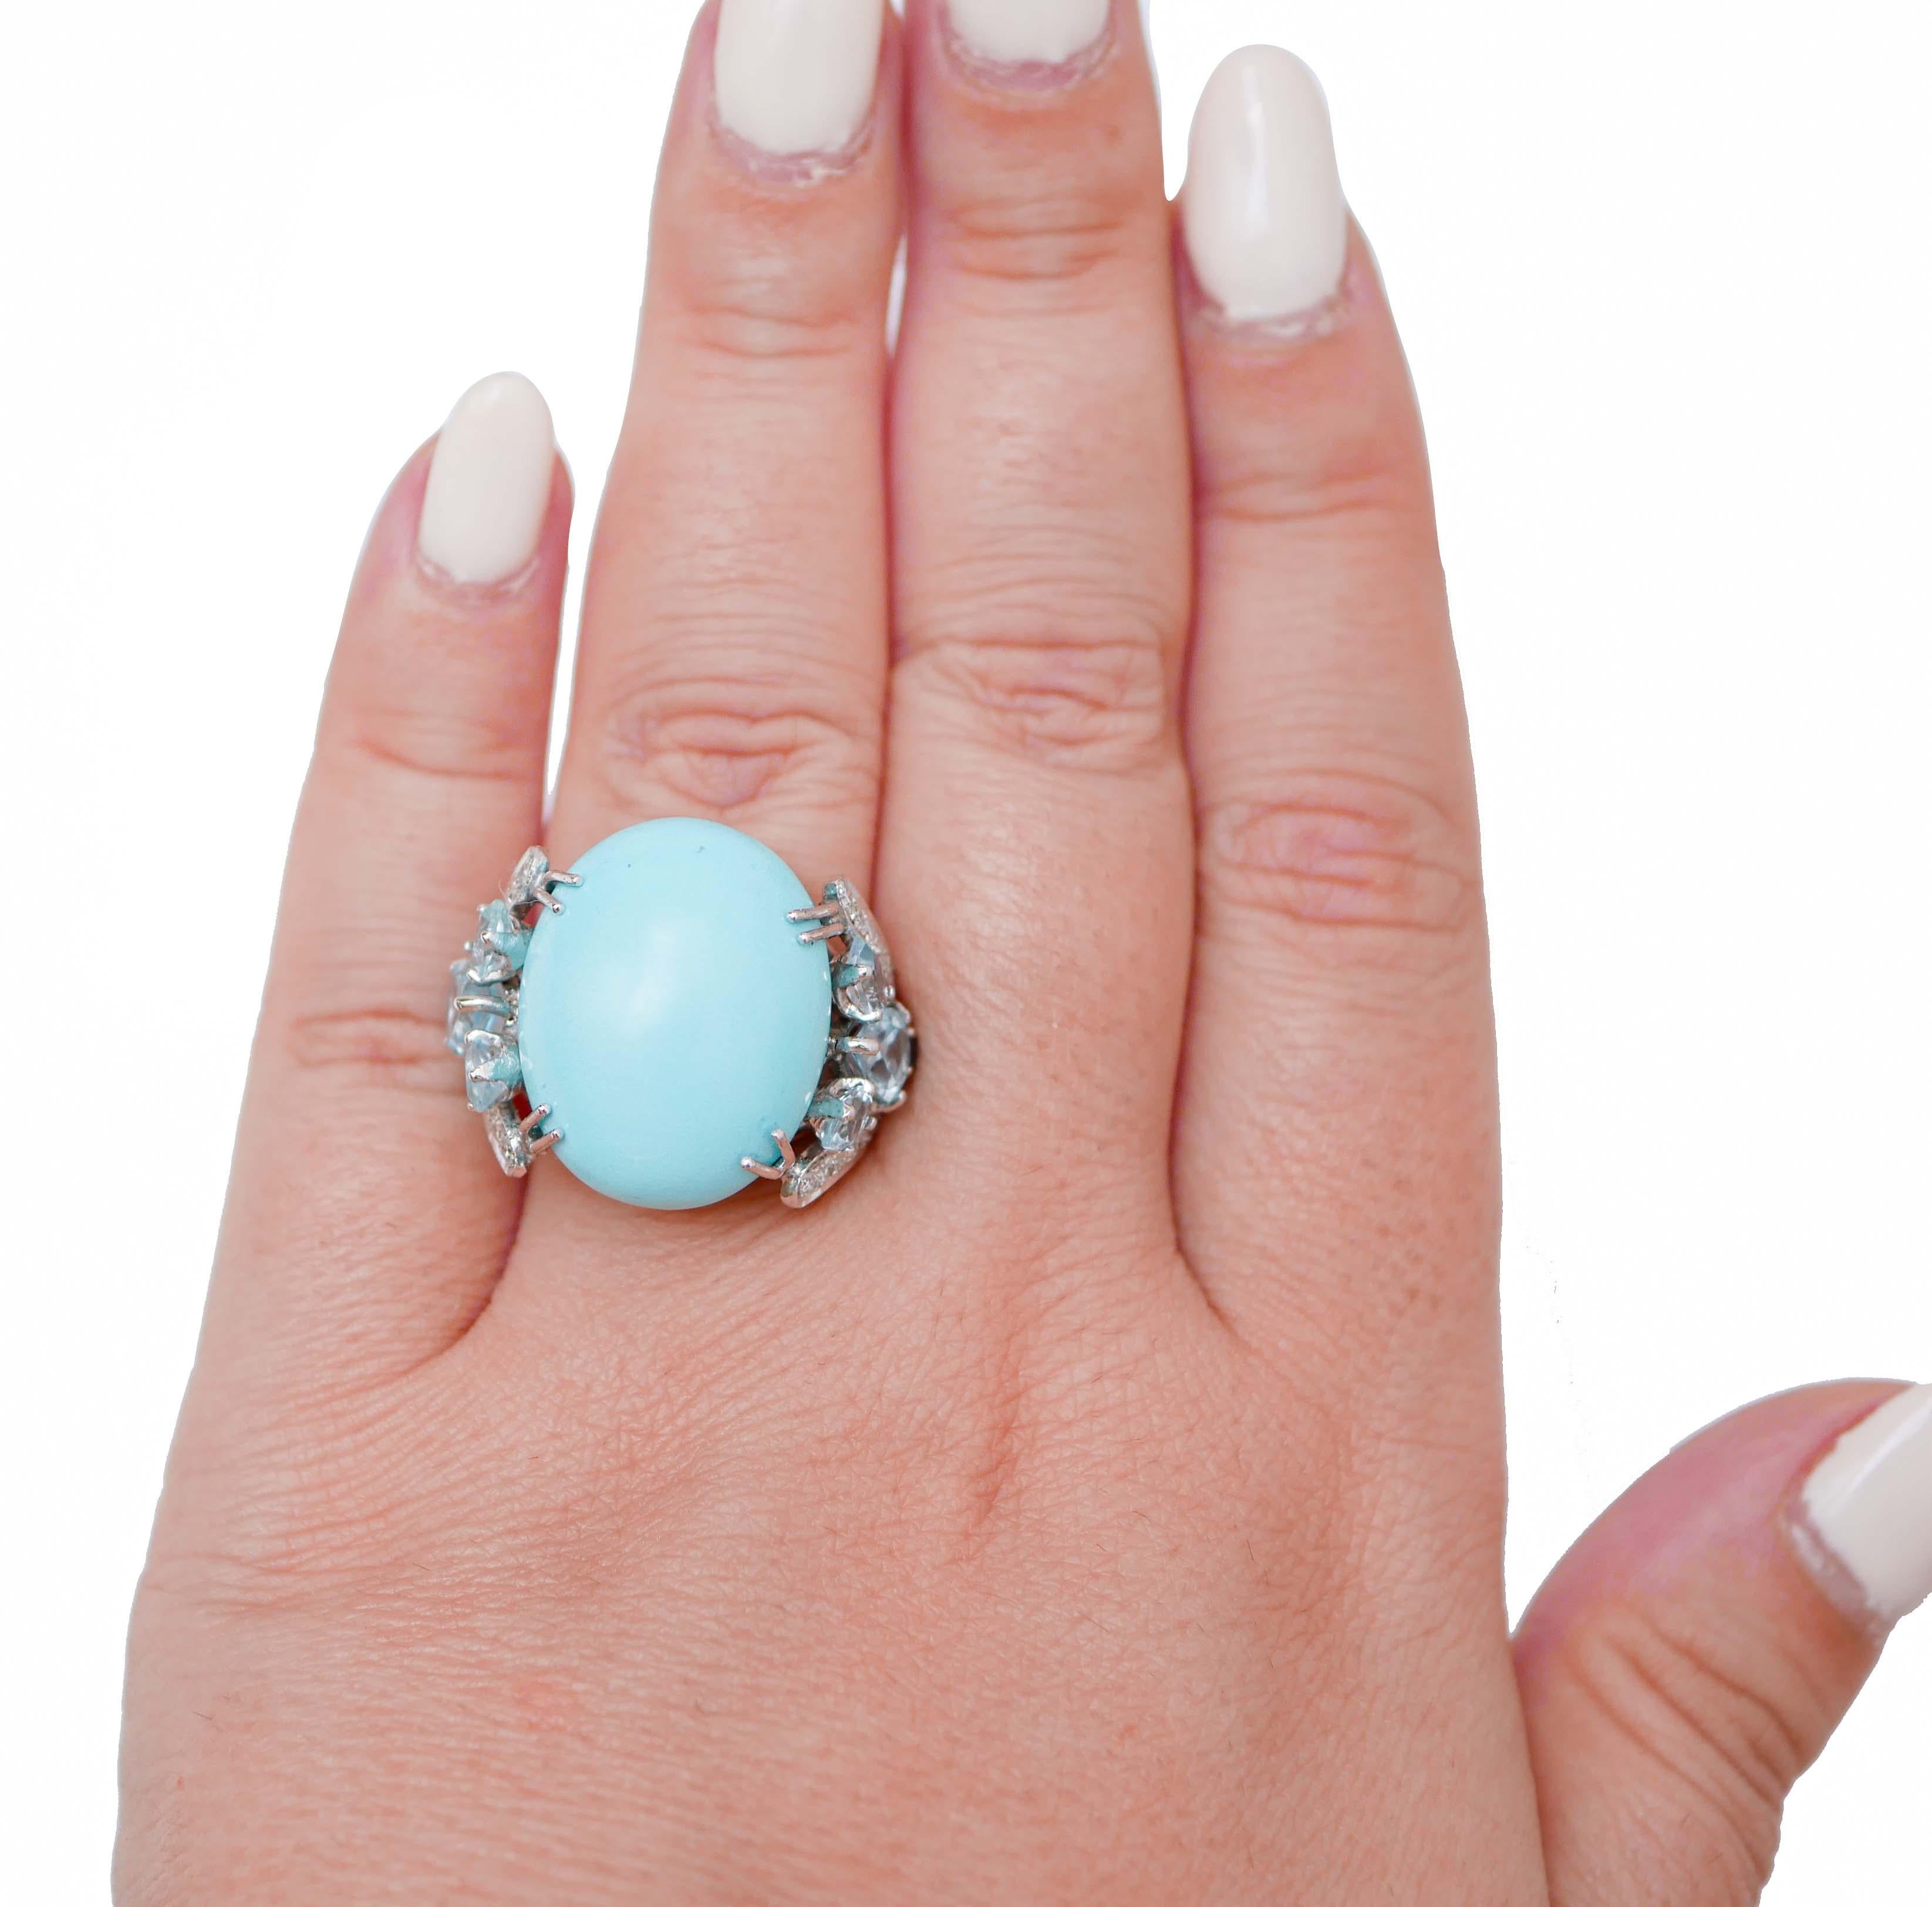 Mixed Cut Turquoise, Topazs, Diamonds, Platinum and 14 Karat White Gold Ring For Sale